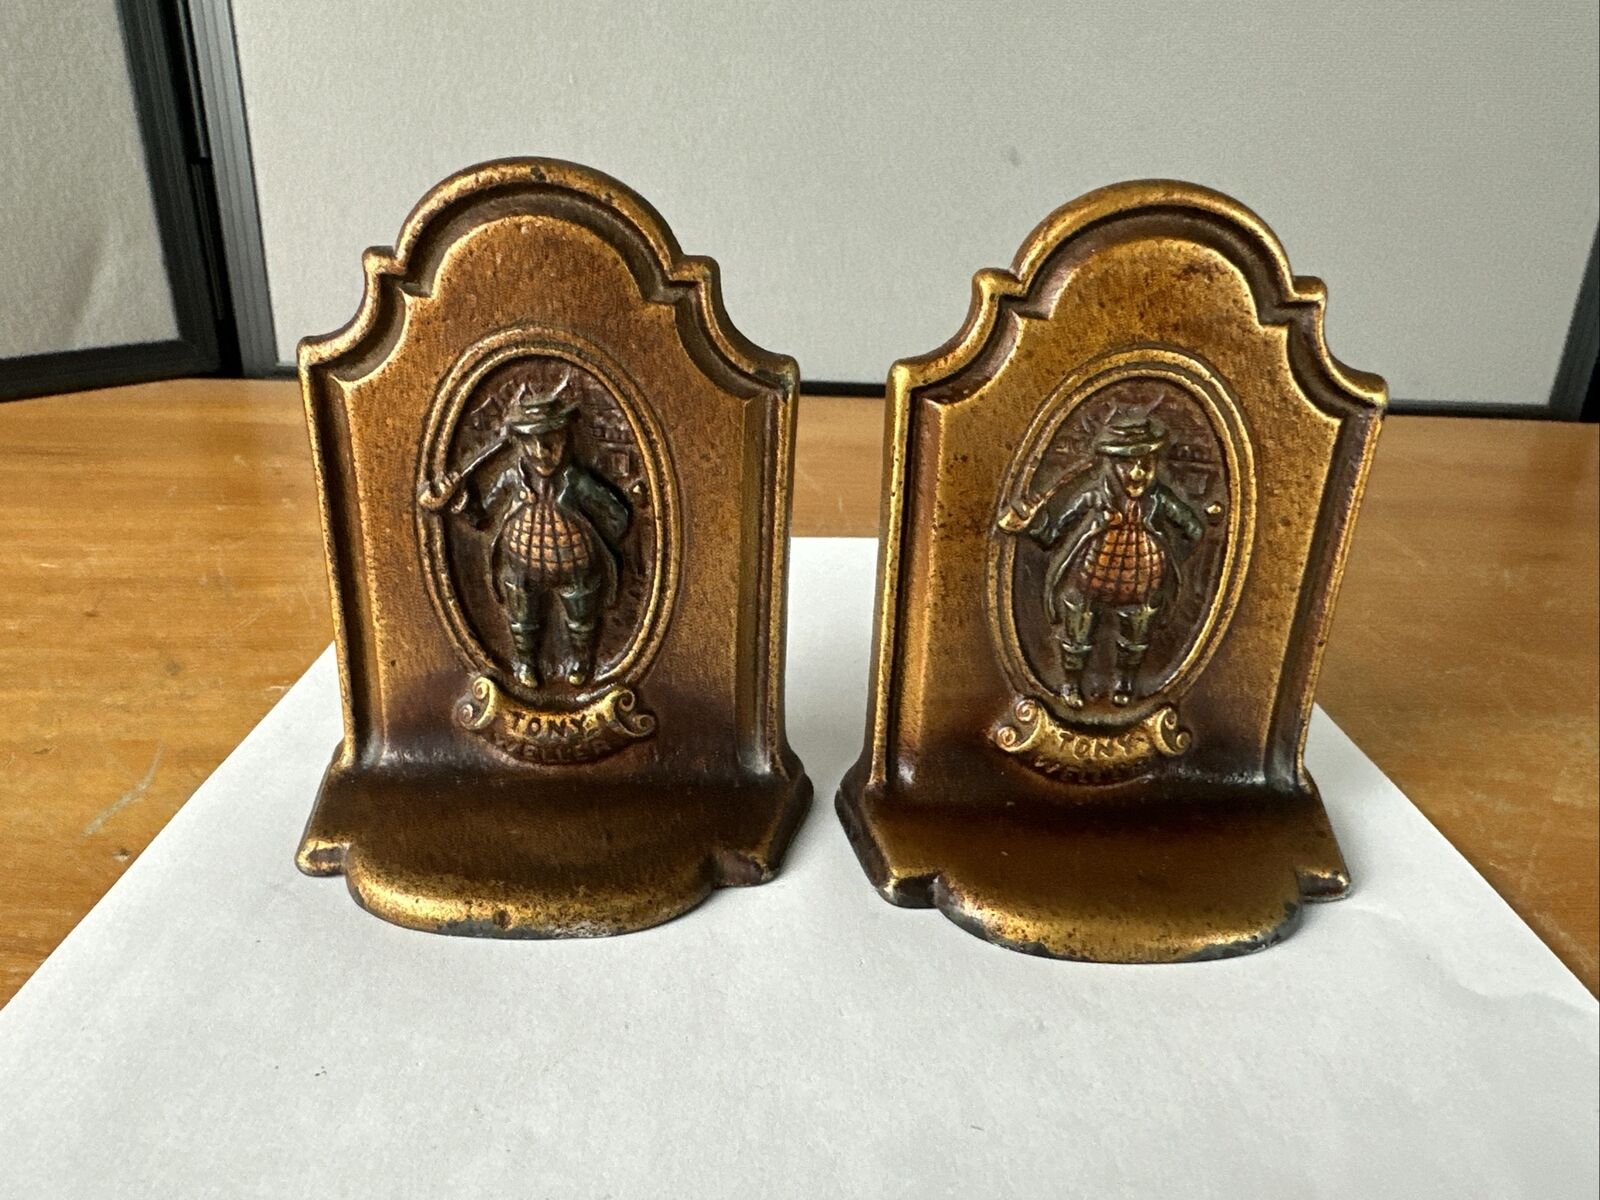 Tony Weller Vintage Charles Dickens Bronze/Cast Iron Bookends Pair Antique